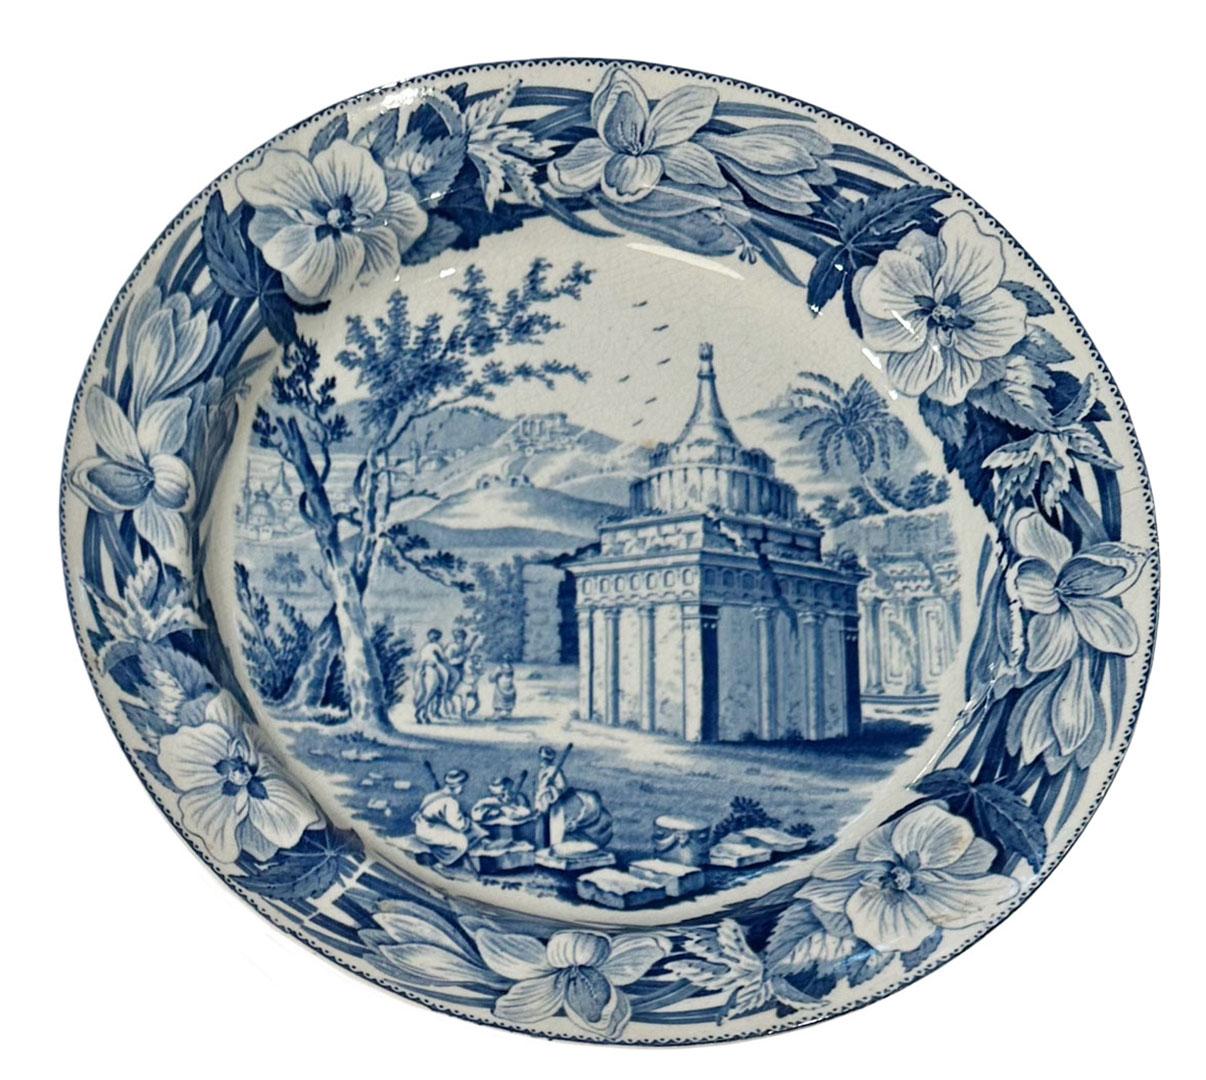 Early 19th century pair of blue and white Pillar’s Tomb plates by Wedgwood, English transfer ware. Wedgwood mark on the back.